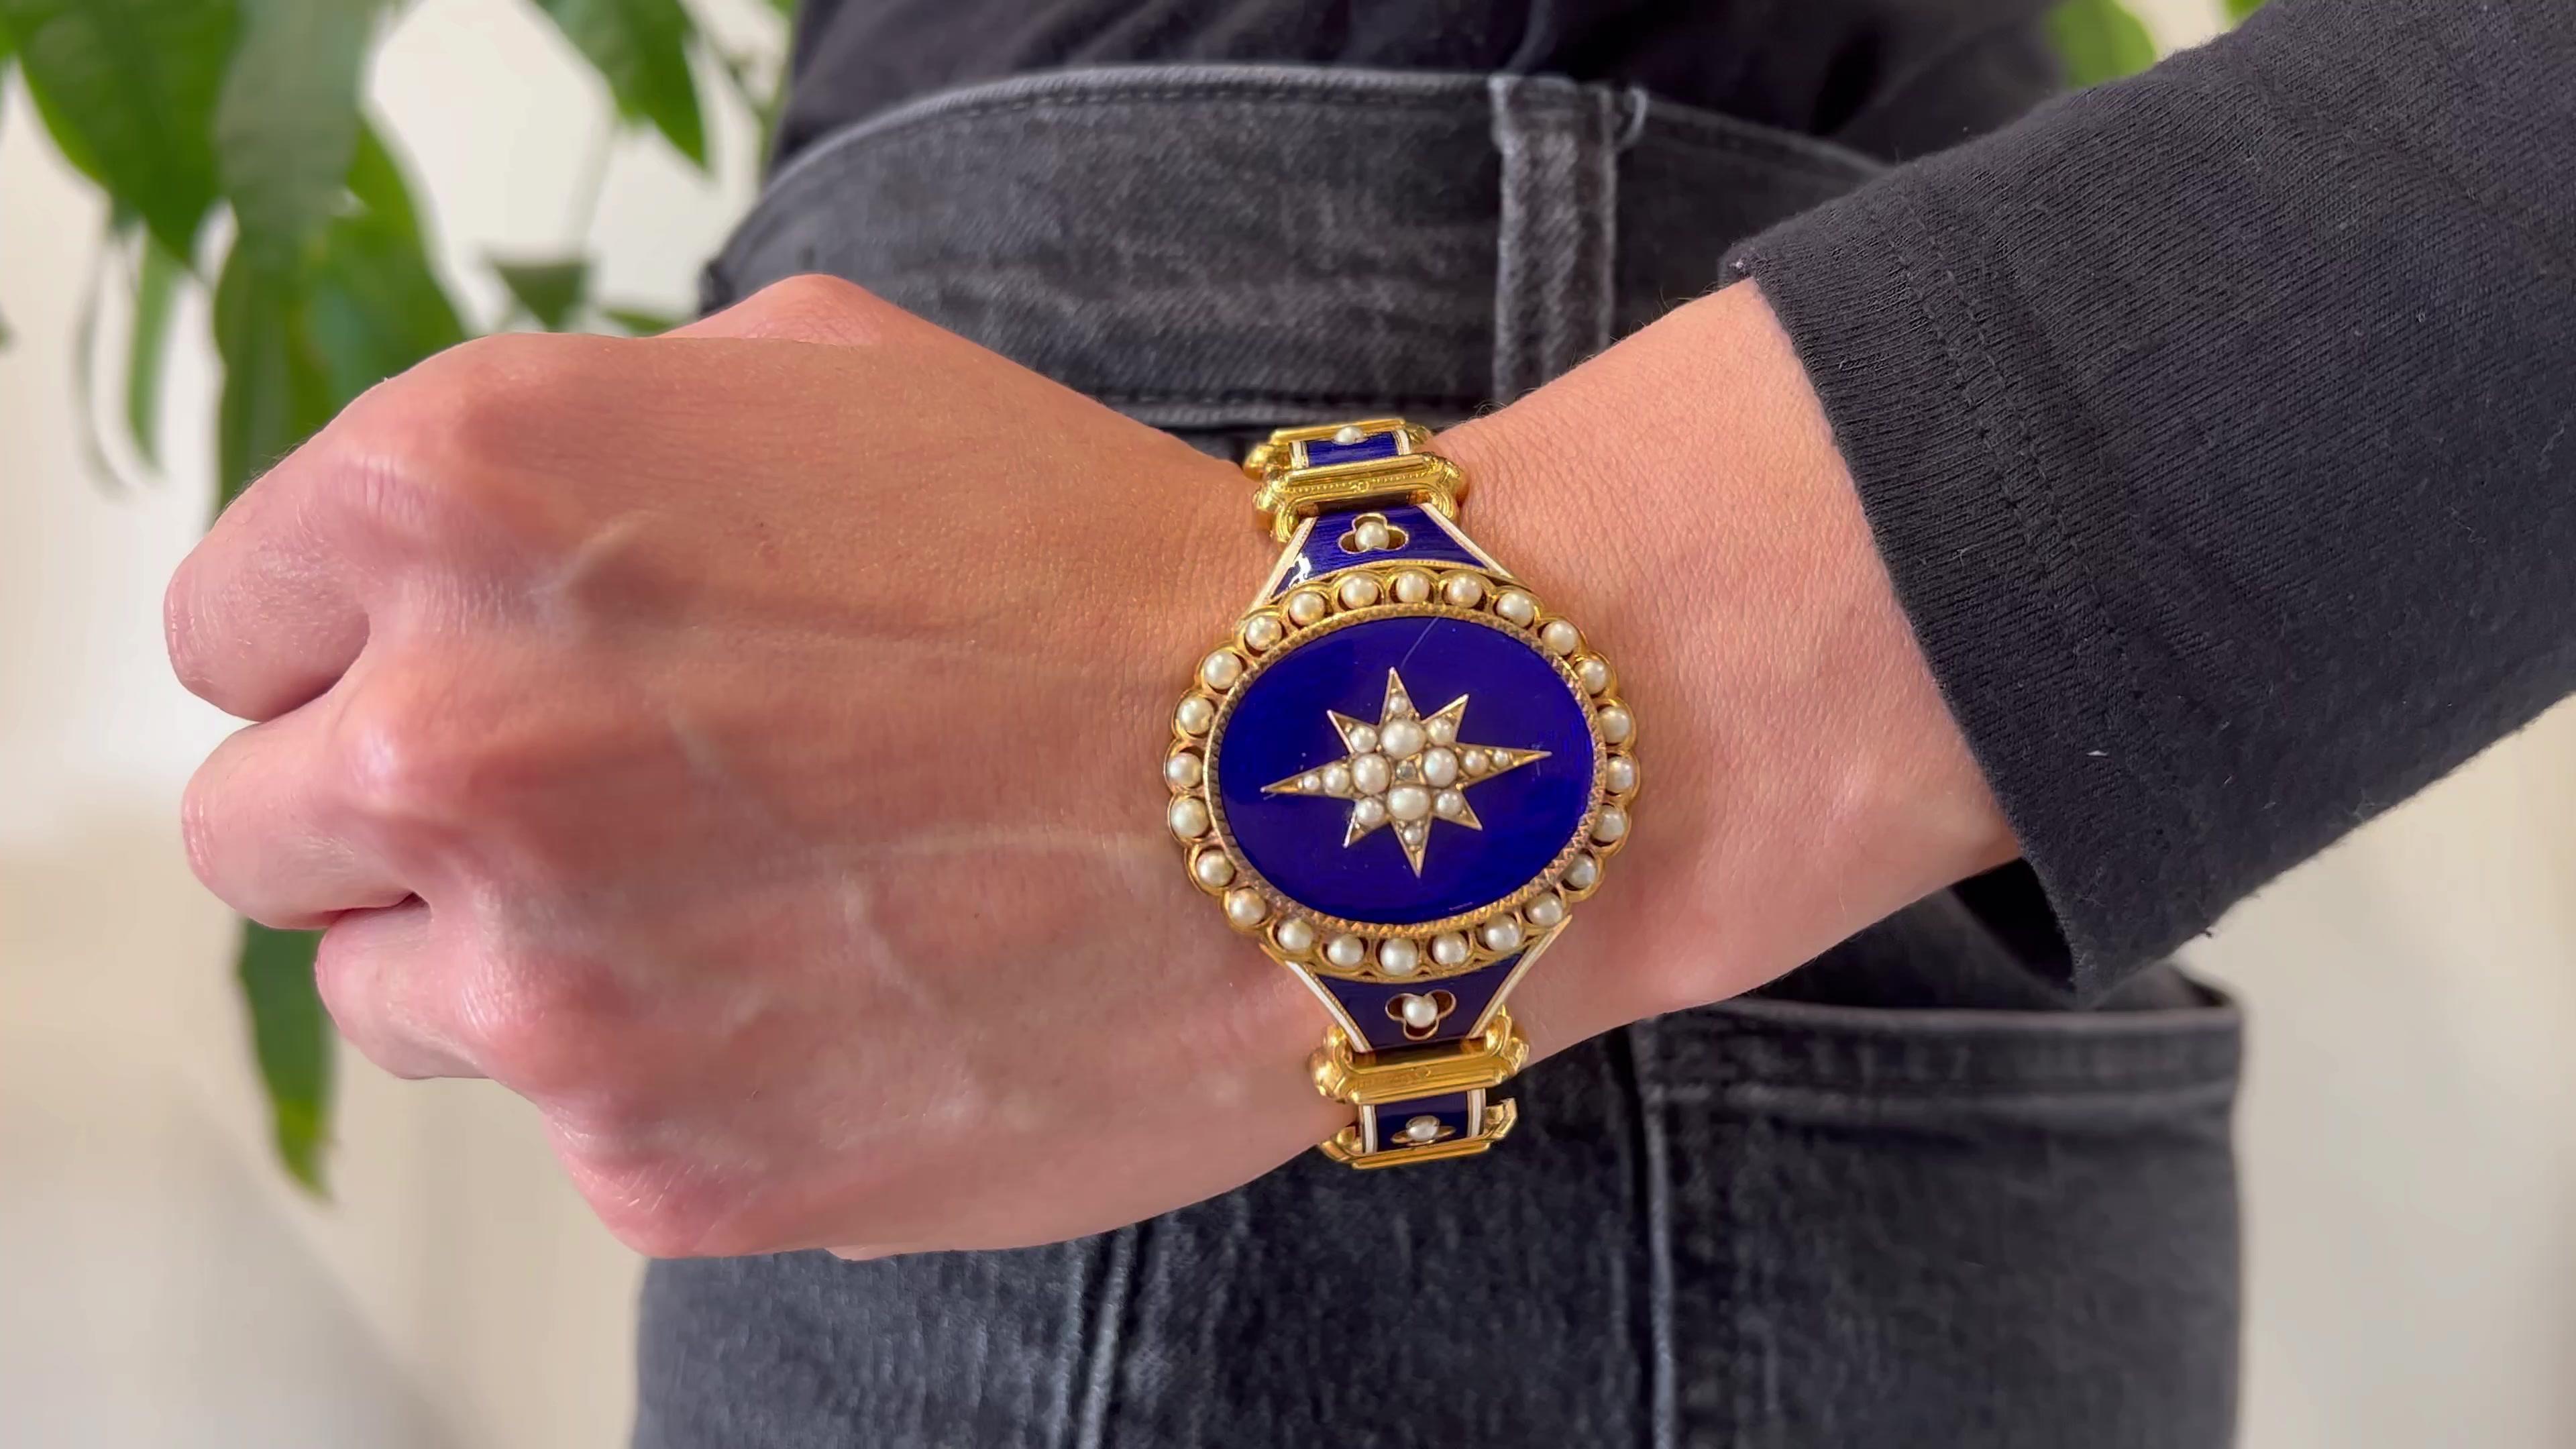 One Antique French Pearl Cobalt Blue Guilloche 18k Yellow Gold Link Bracelet. Featuring one senaille cut diamond. Accented by 46 pearls. Crafted in 18 karat yellow gold with Cobalt blue enamel with French hallmarks. Bracelet straps are removable and